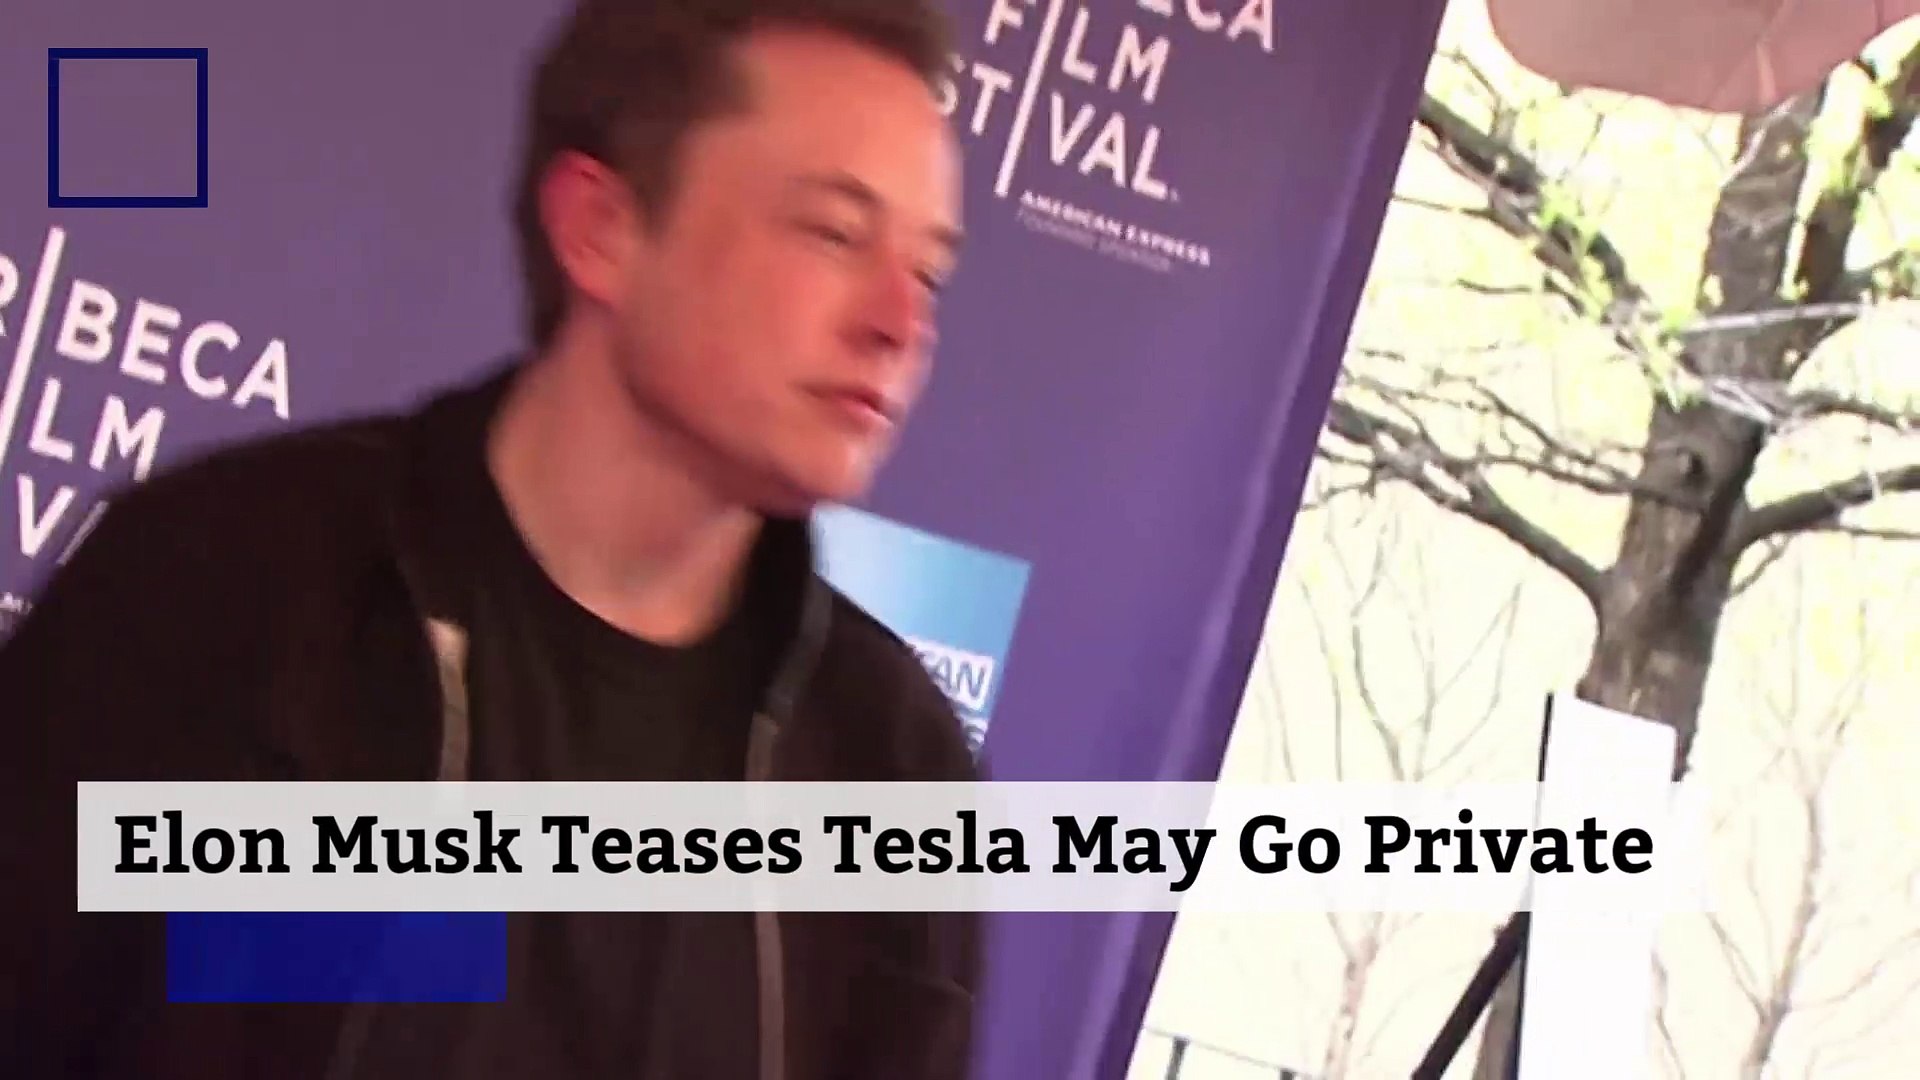 Elon Musk Teases Tesla May Go Private